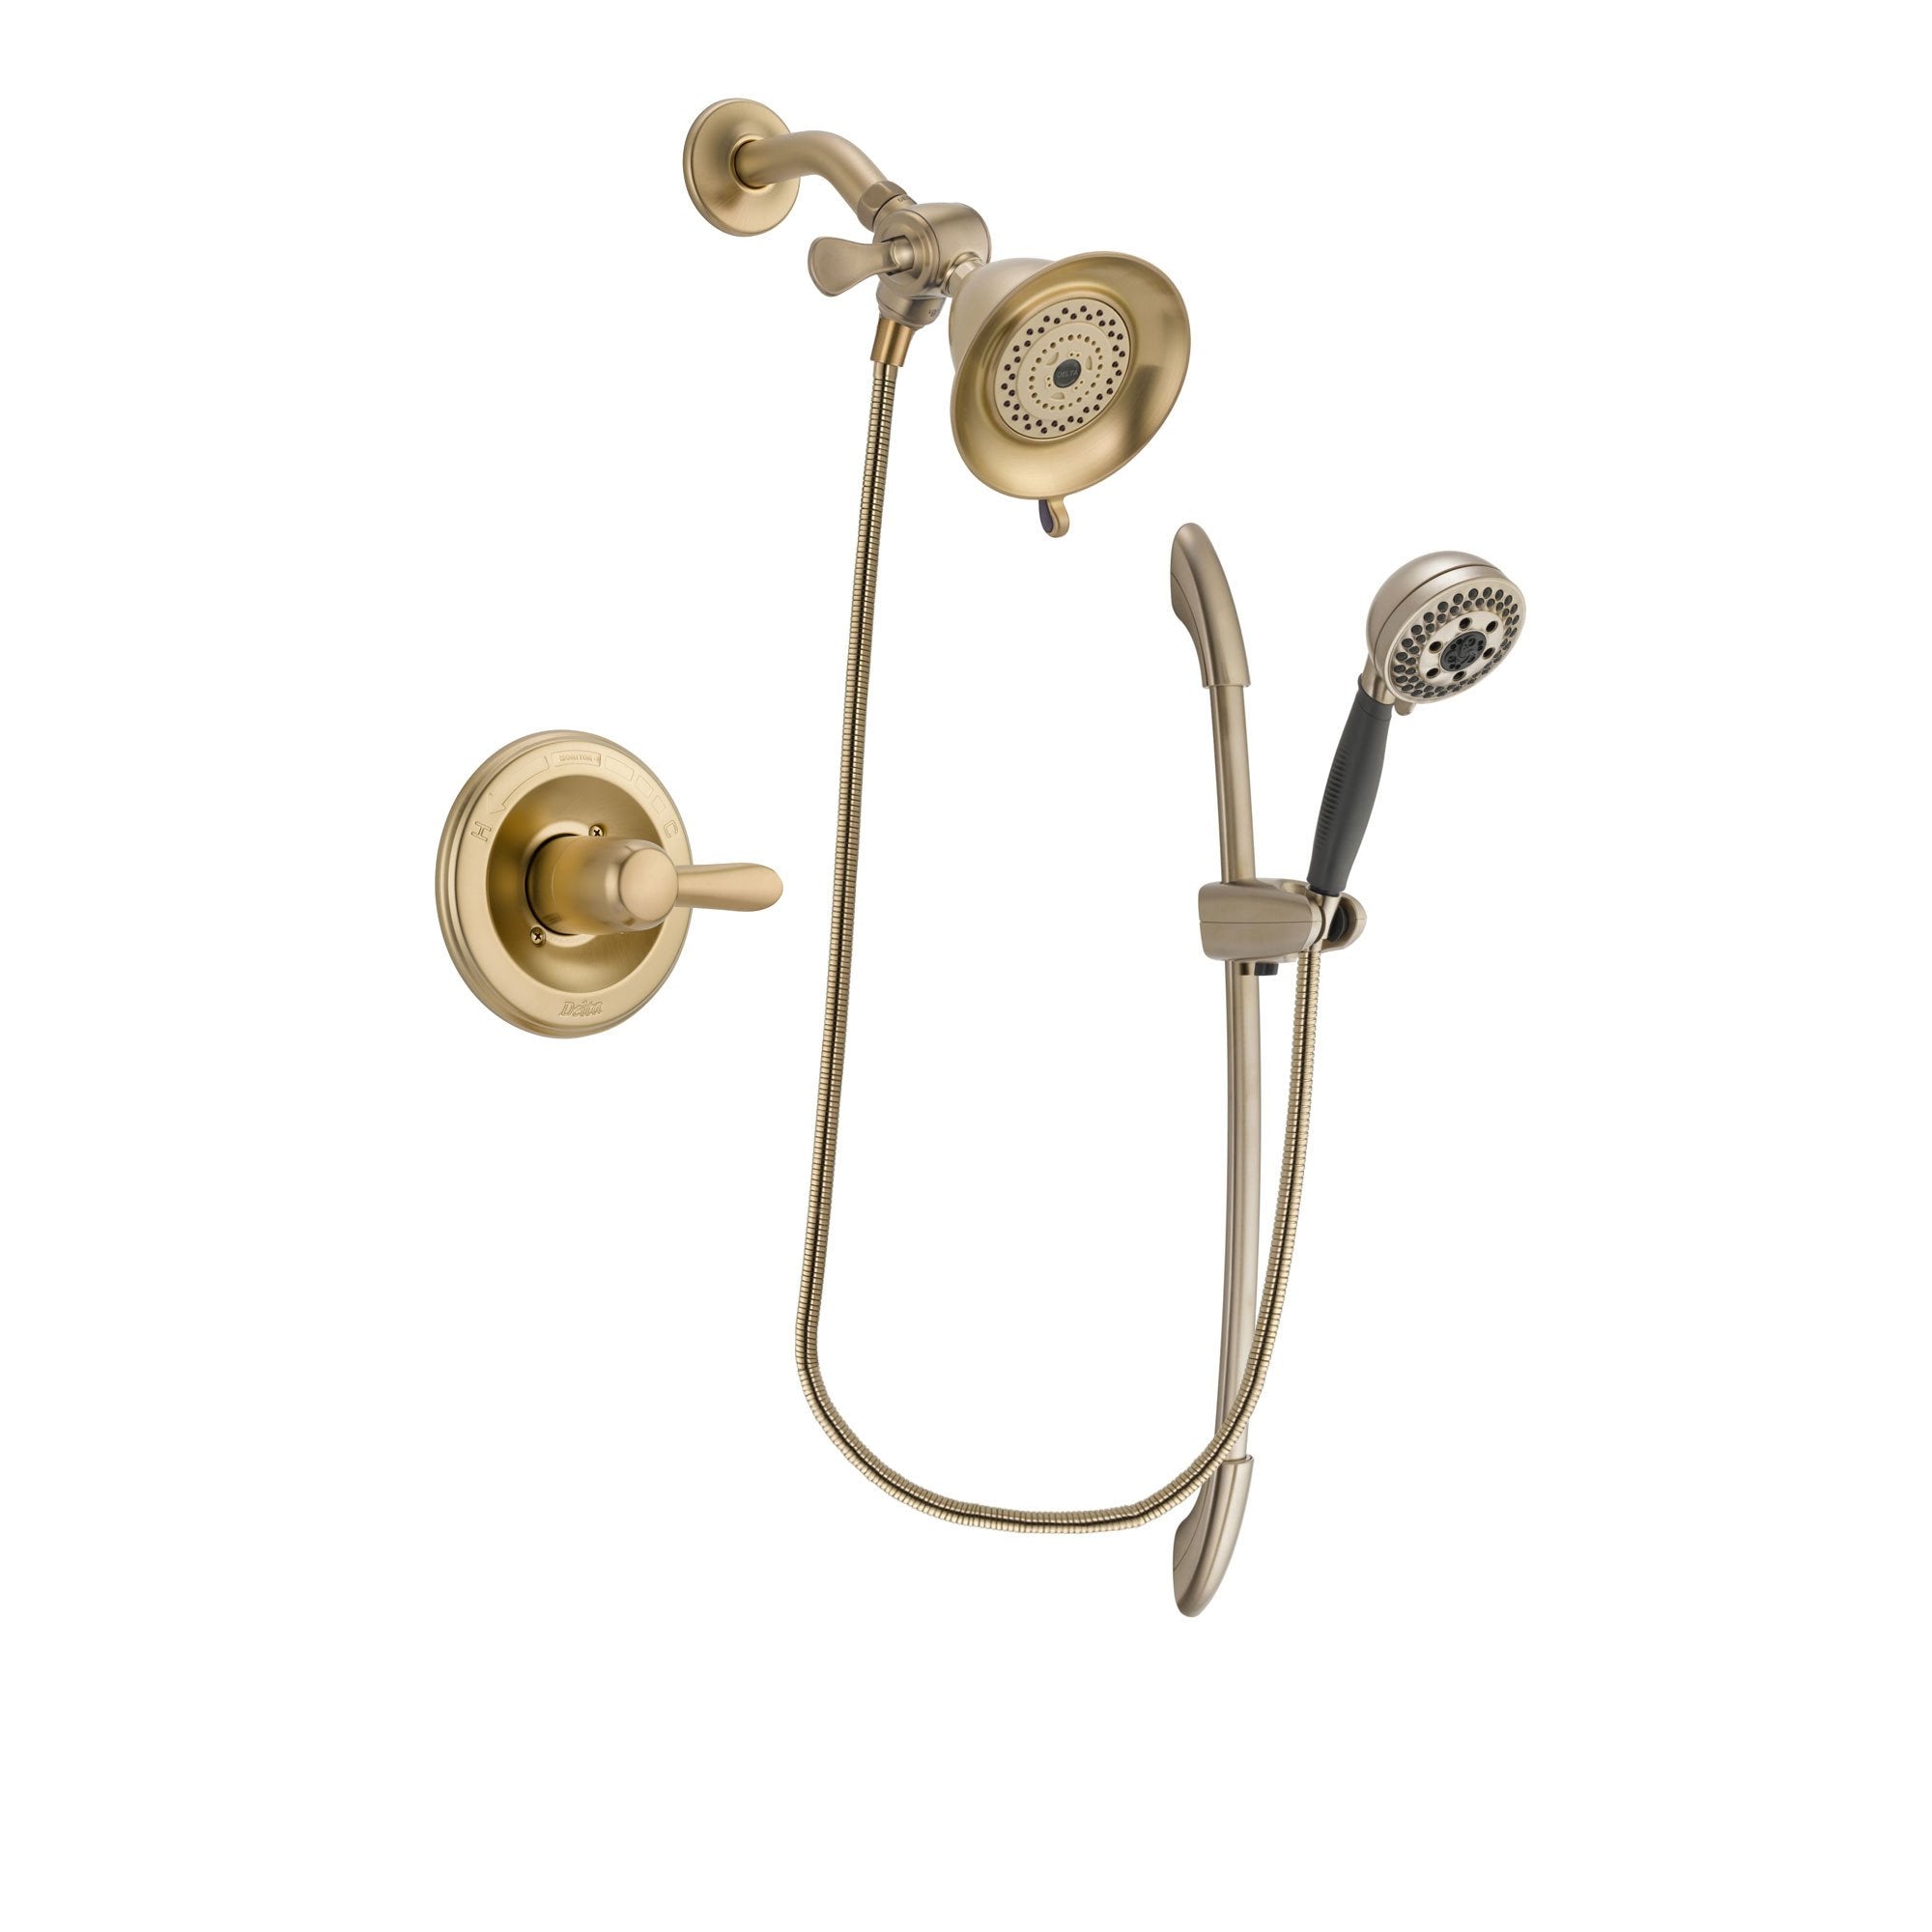 Delta Lahara Champagne Bronze Finish Shower Faucet System Package with Water-Efficient Shower Head and 5-Spray Handshower with Slide Bar Includes Rough-in Valve DSP3326V